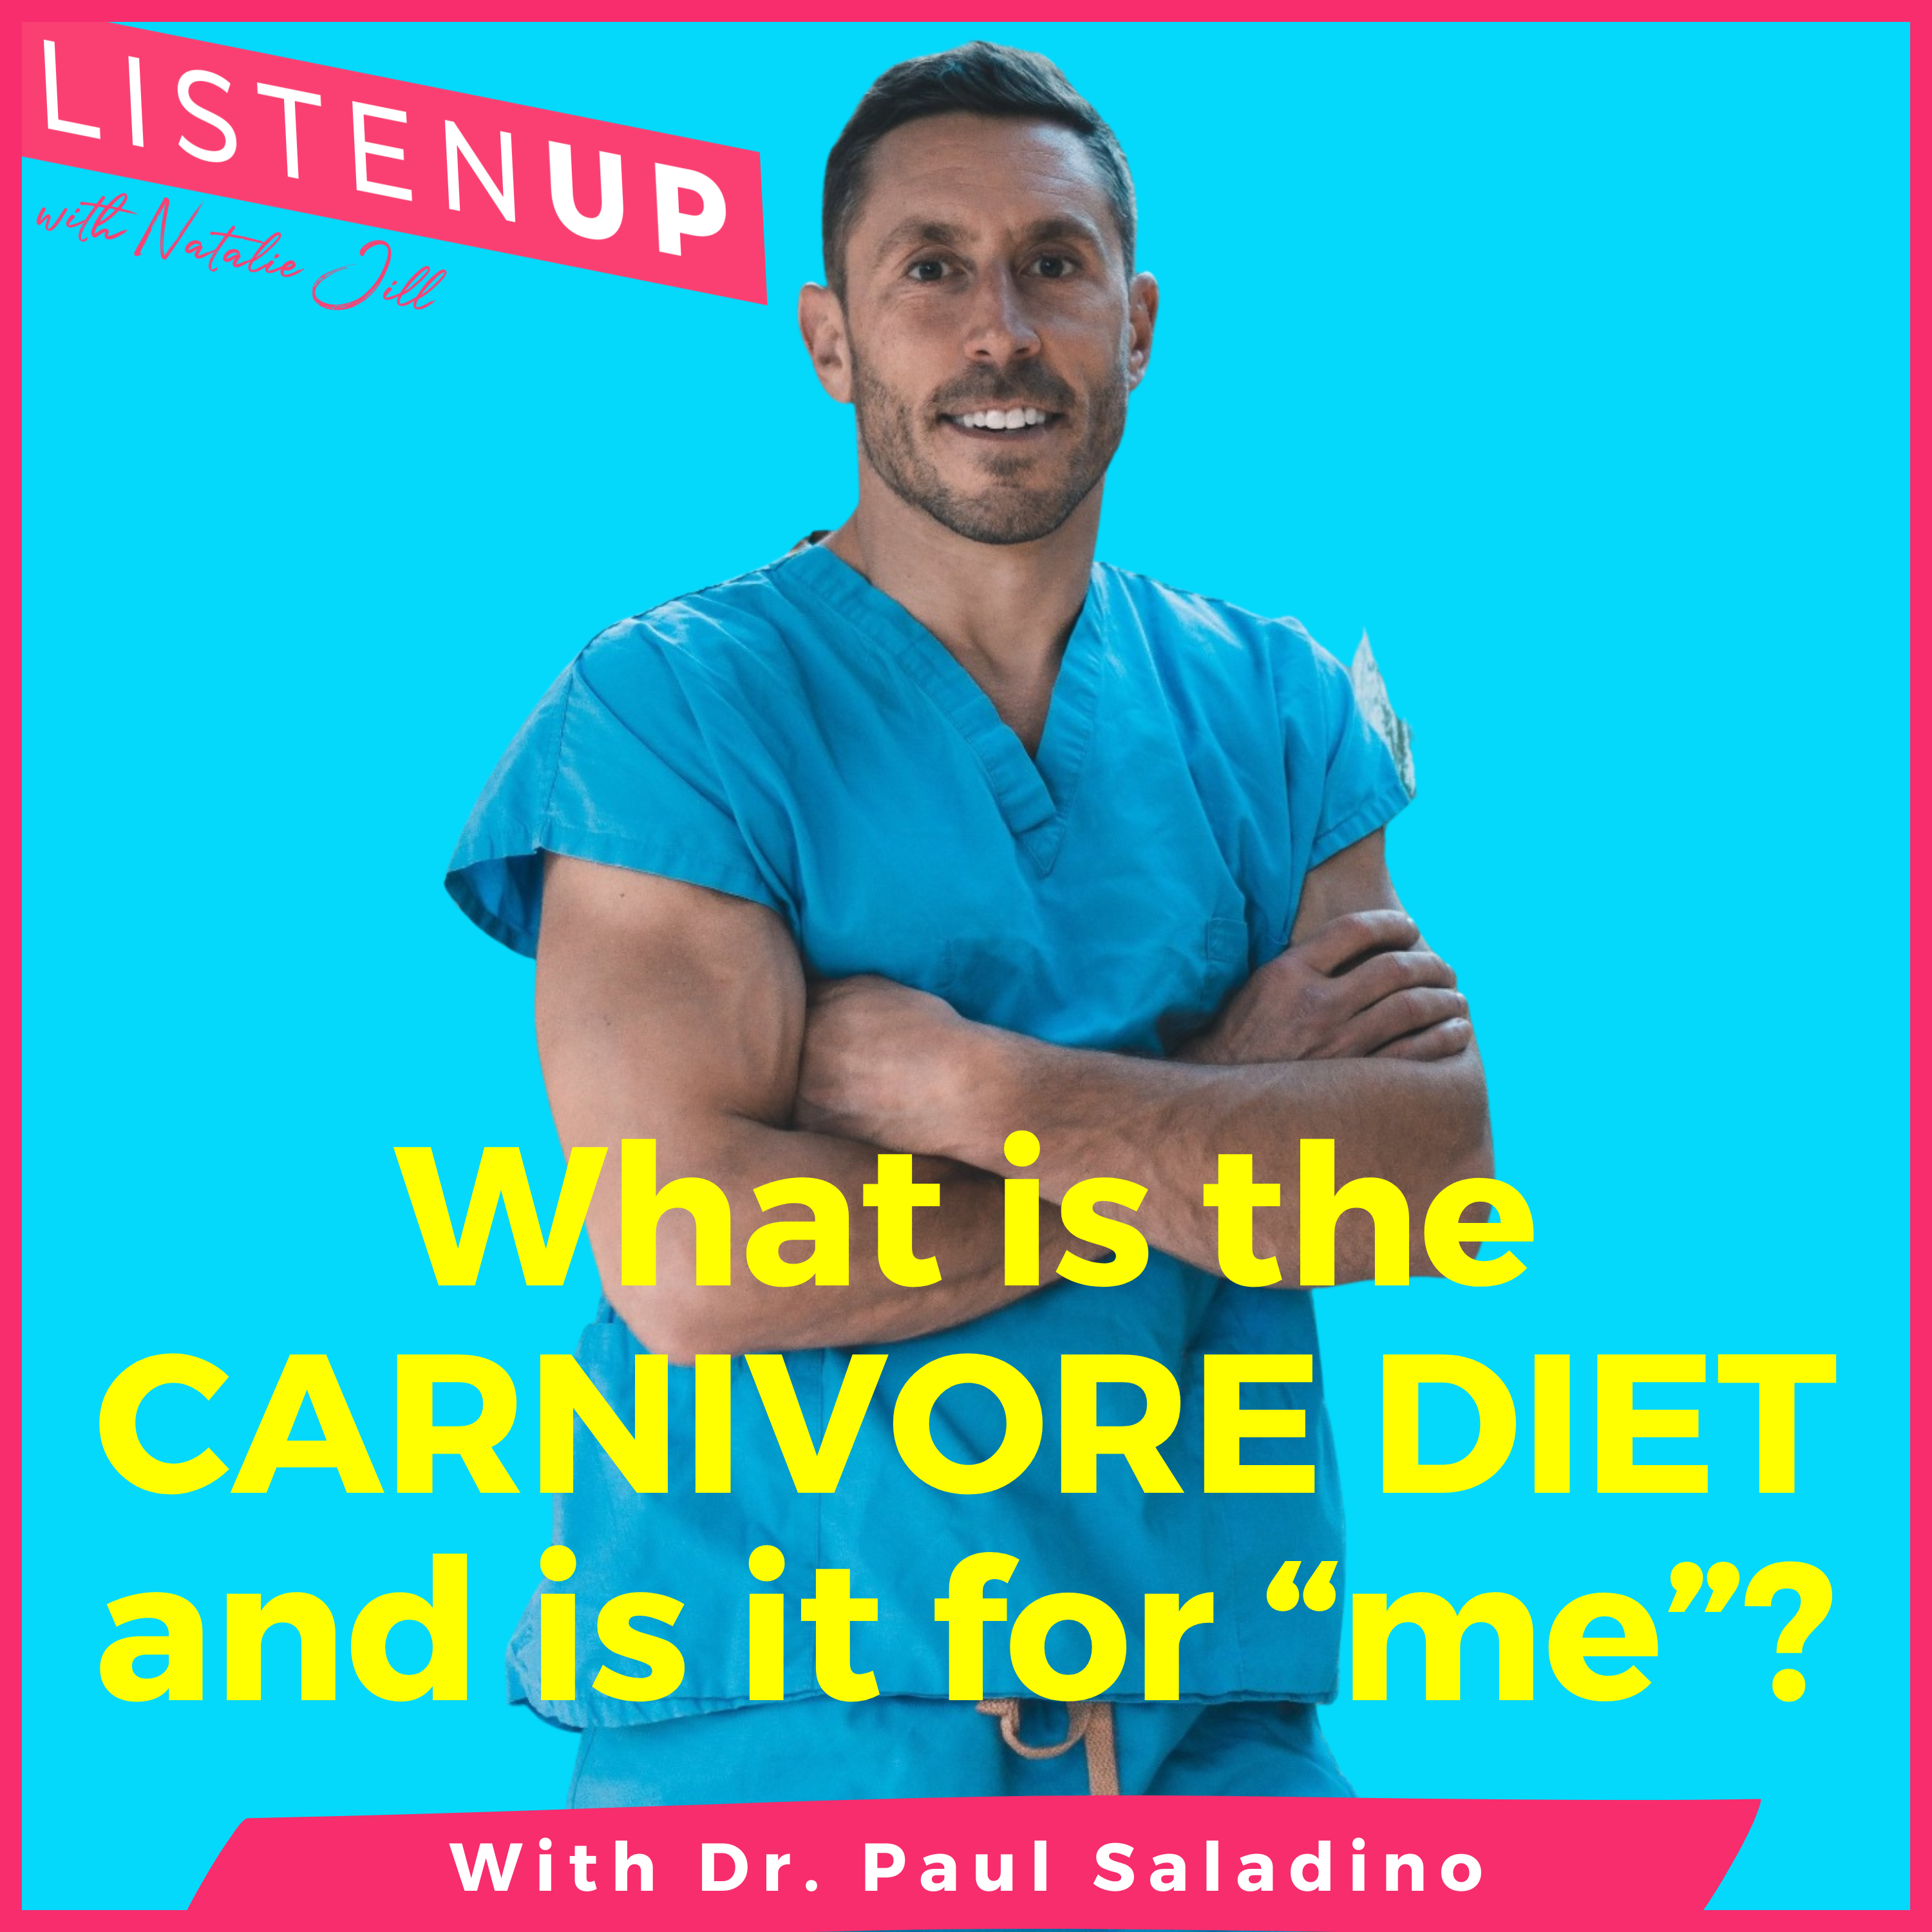 What is the CARNIVORE DIET and is it for “me”? with Dr. Paul Saladino